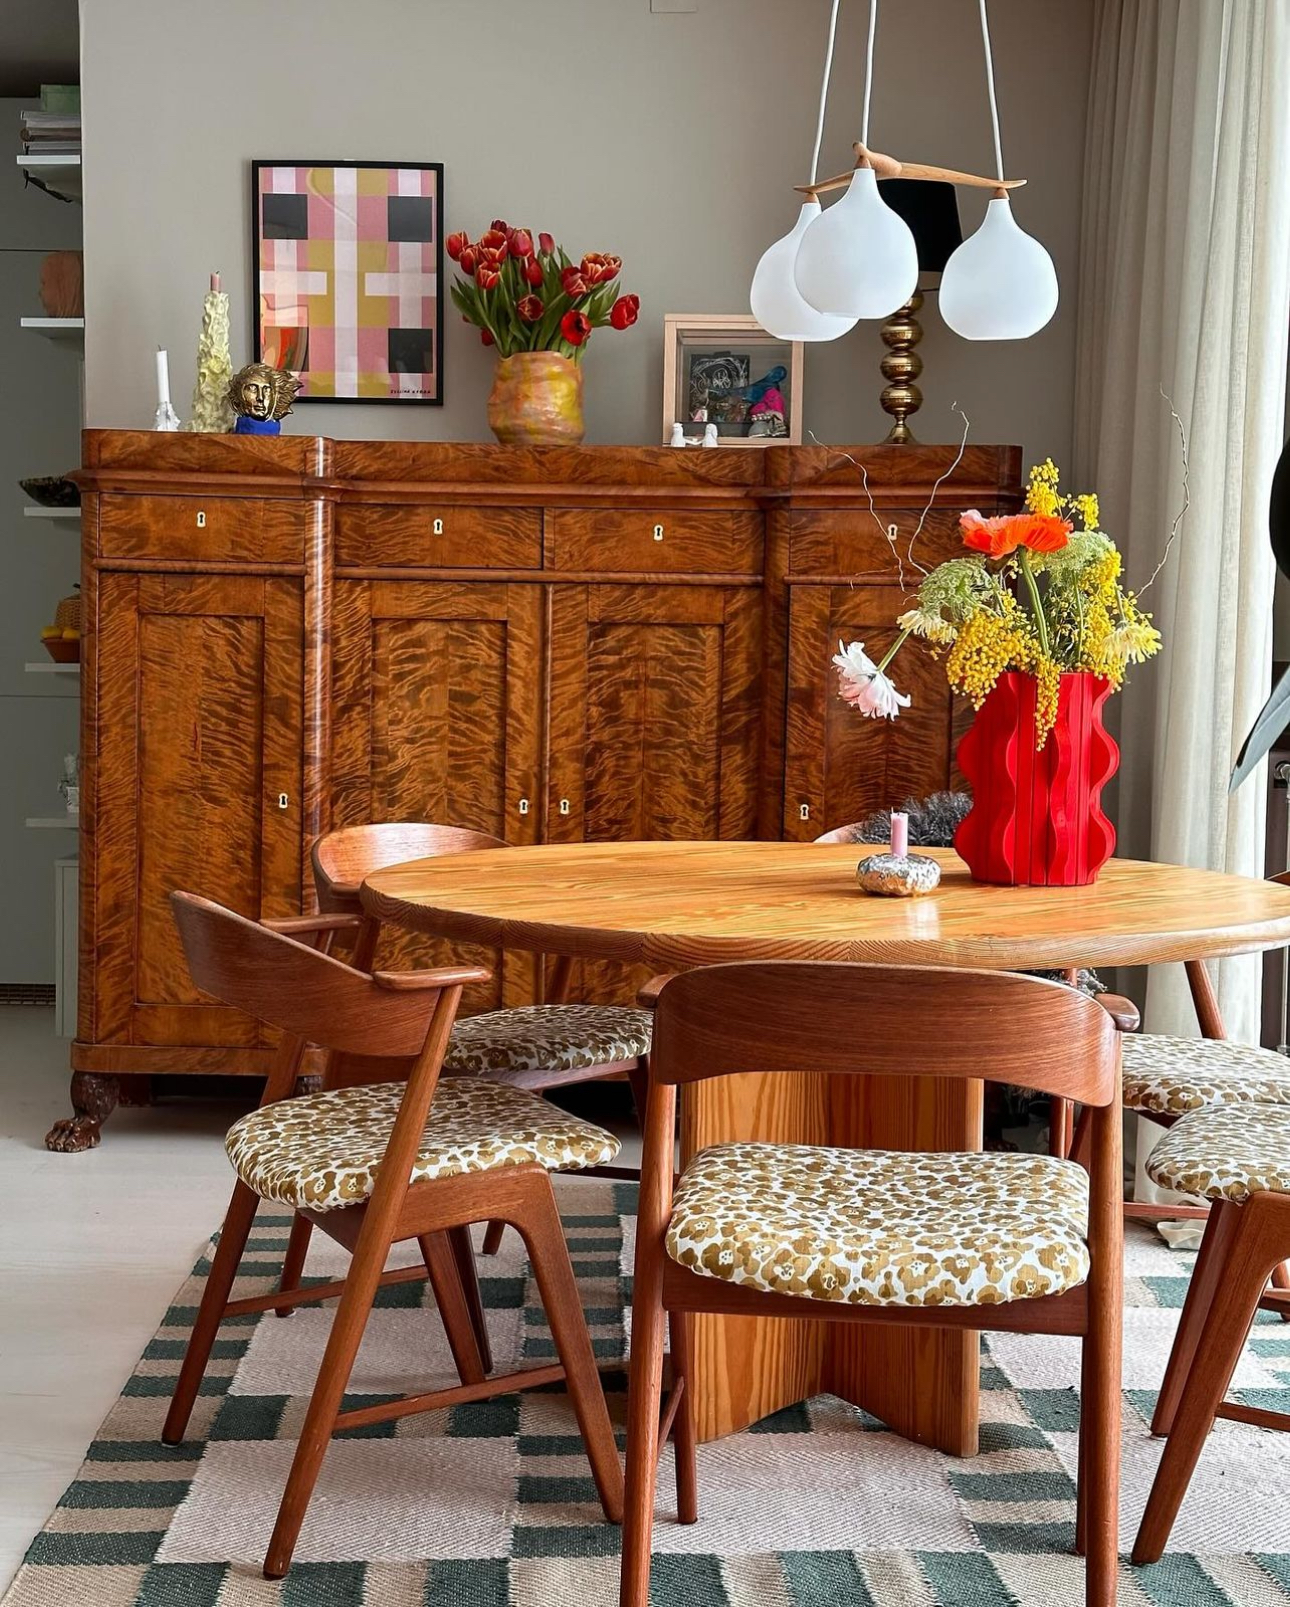 Dining room with vintage furniture and different patterns in a colorful Scandinavian style.